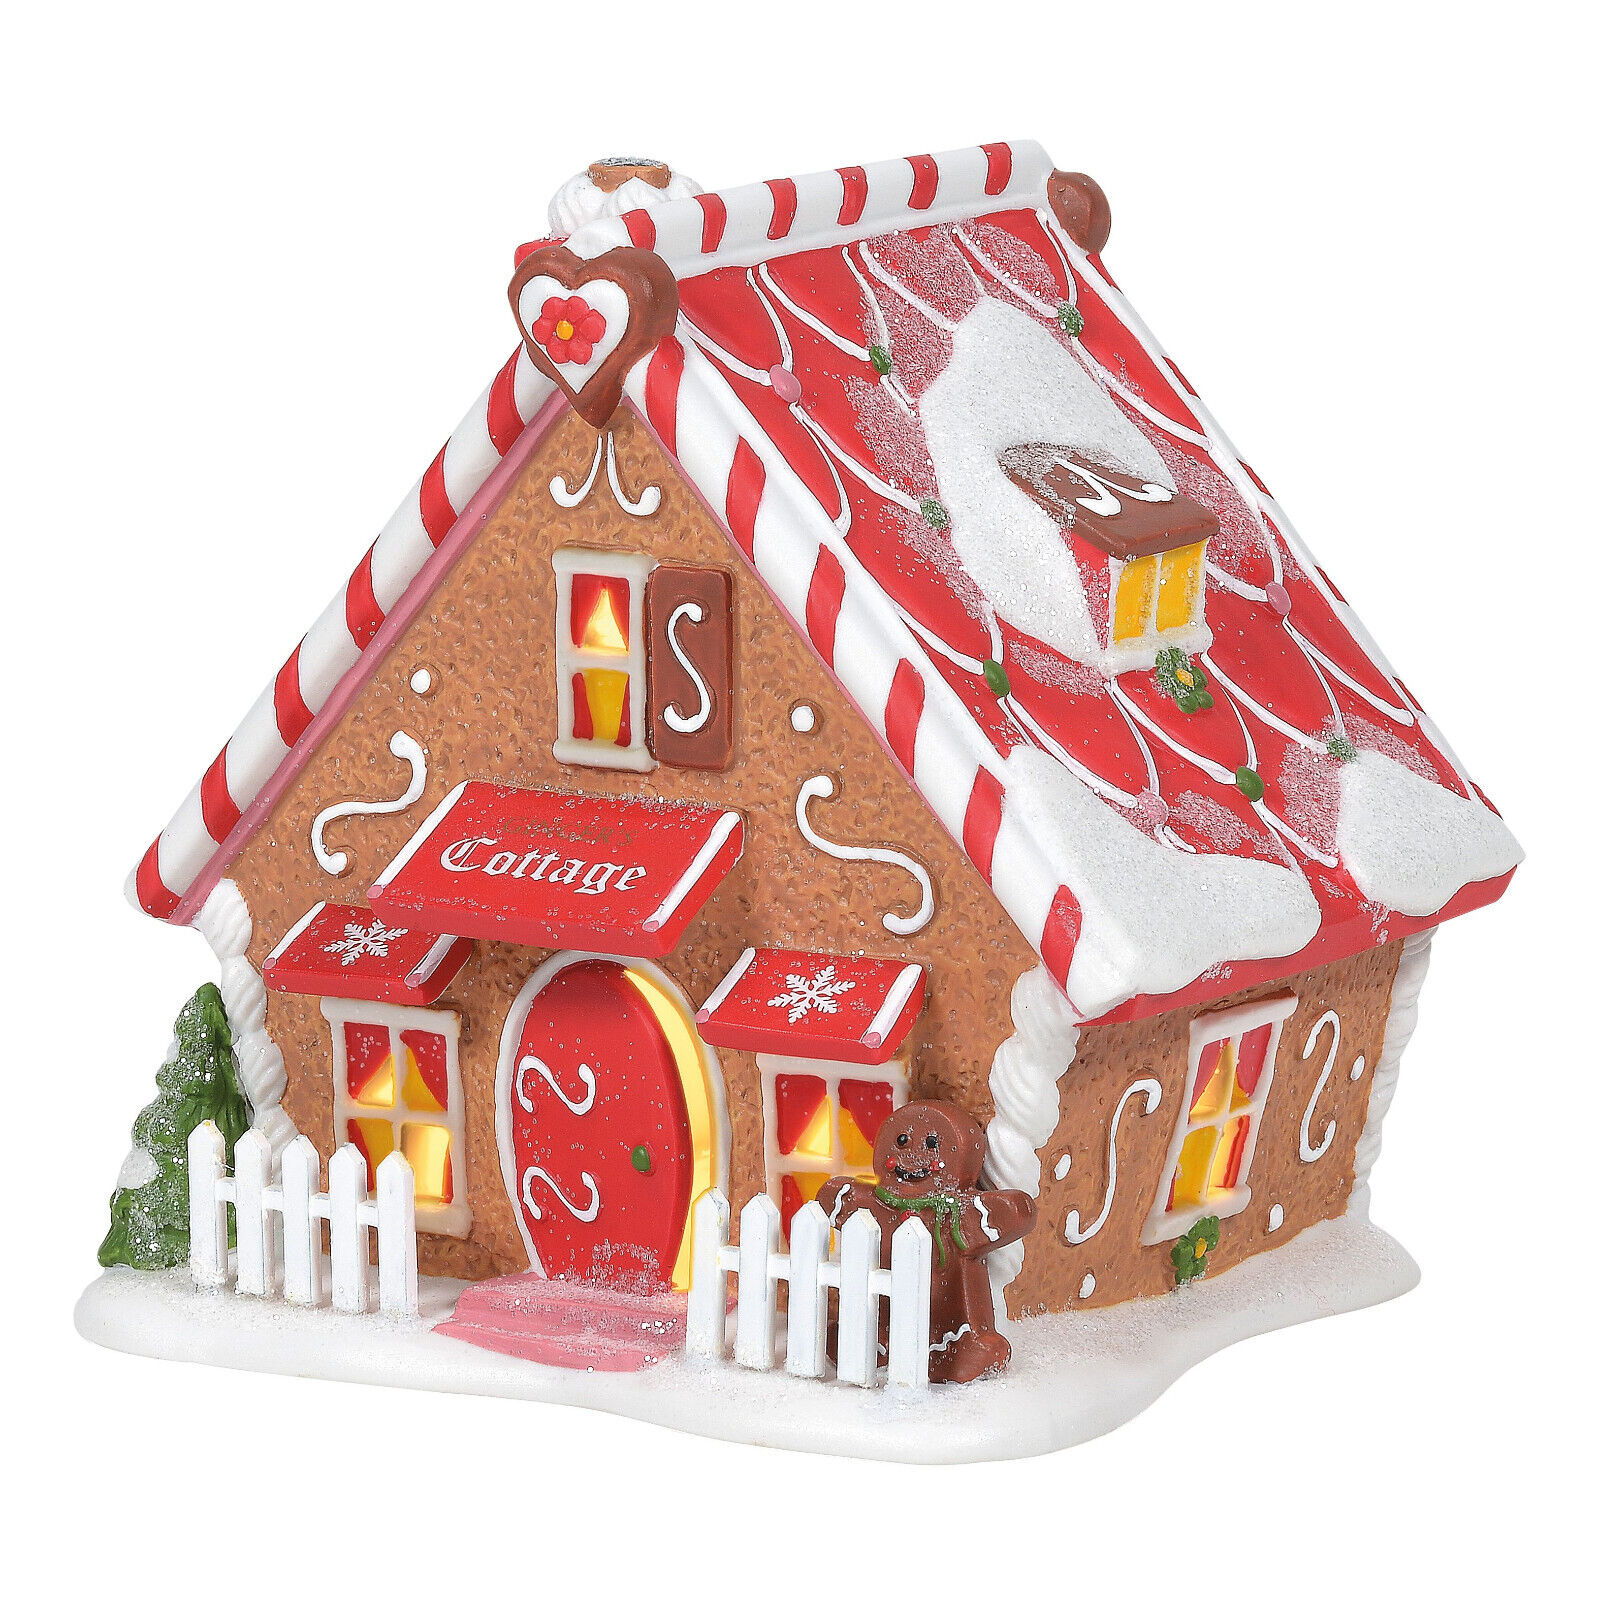 Dept 56 GINGER'S COTTAGE North Pole Village 6005428 BRAND NEW IN BOX Gingers